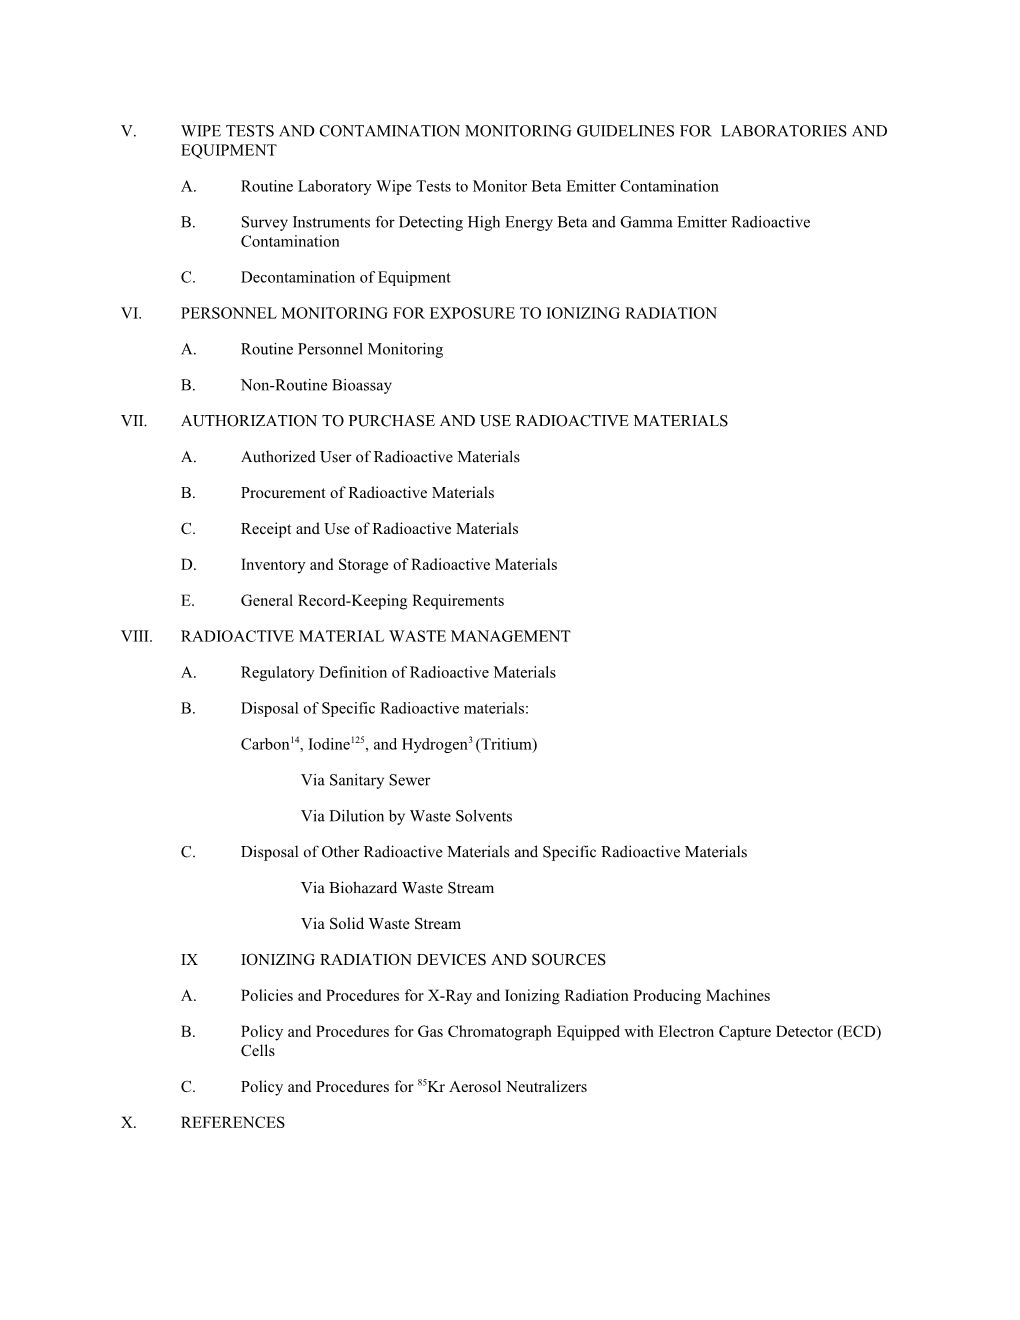 Table of Contents s389